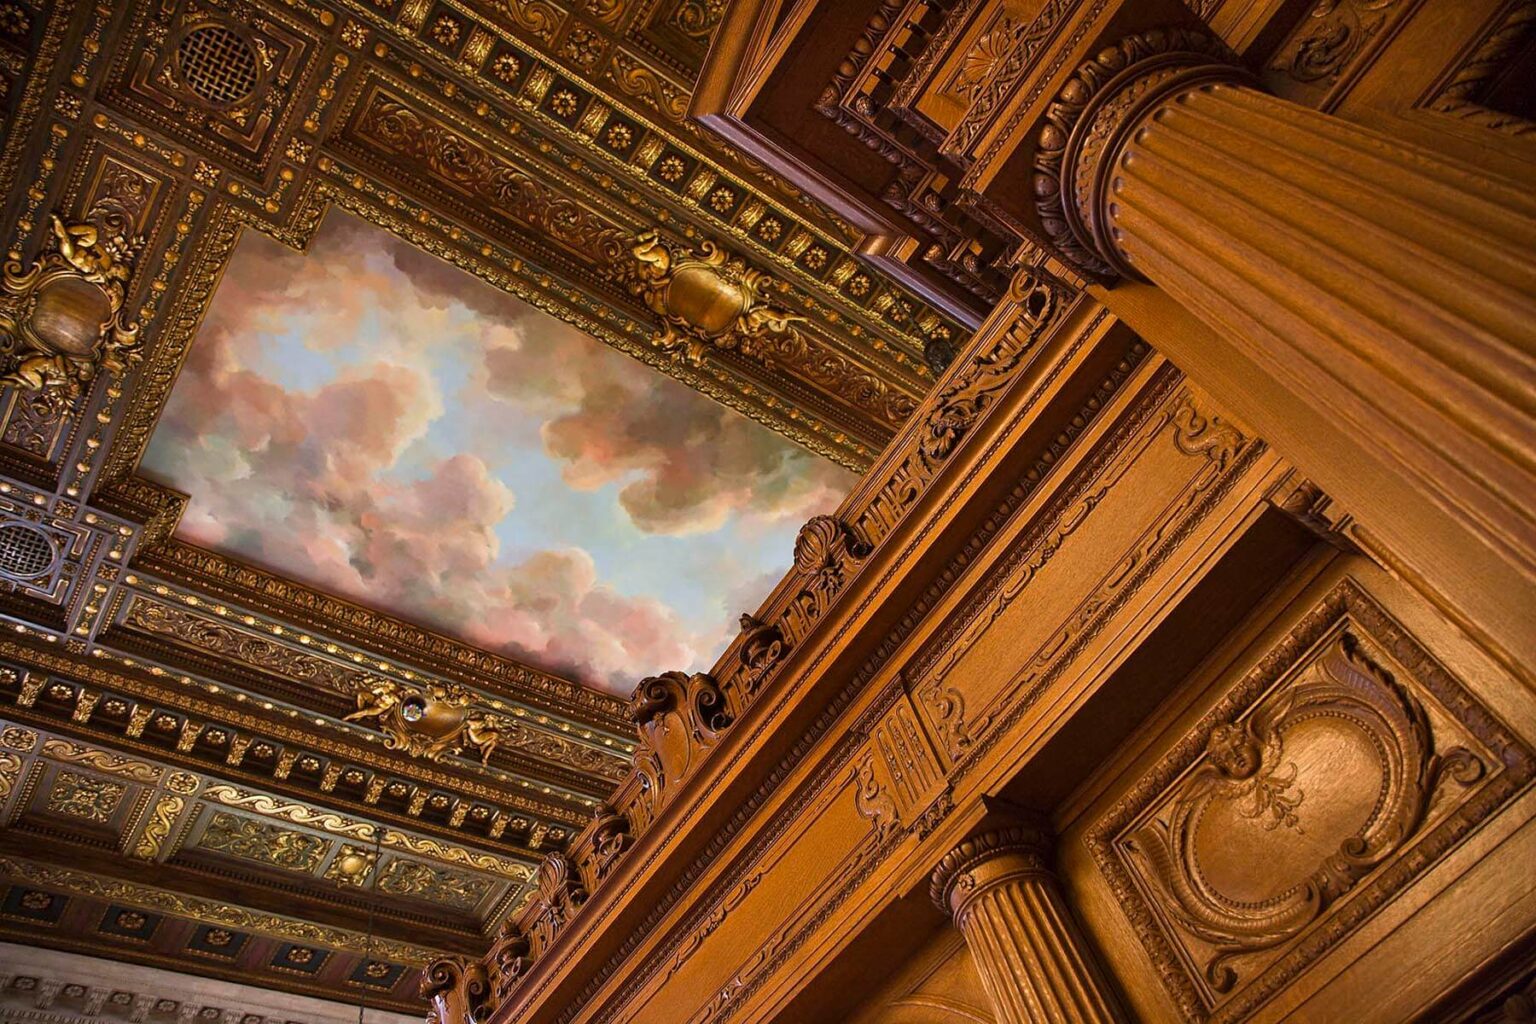 CEILING MURAL and WOODWORK in the ROSE READING ROOM of the NEW YORK CITY PUBLIC LIBRARY.  - Architecture photography by Eagle Visions Photography